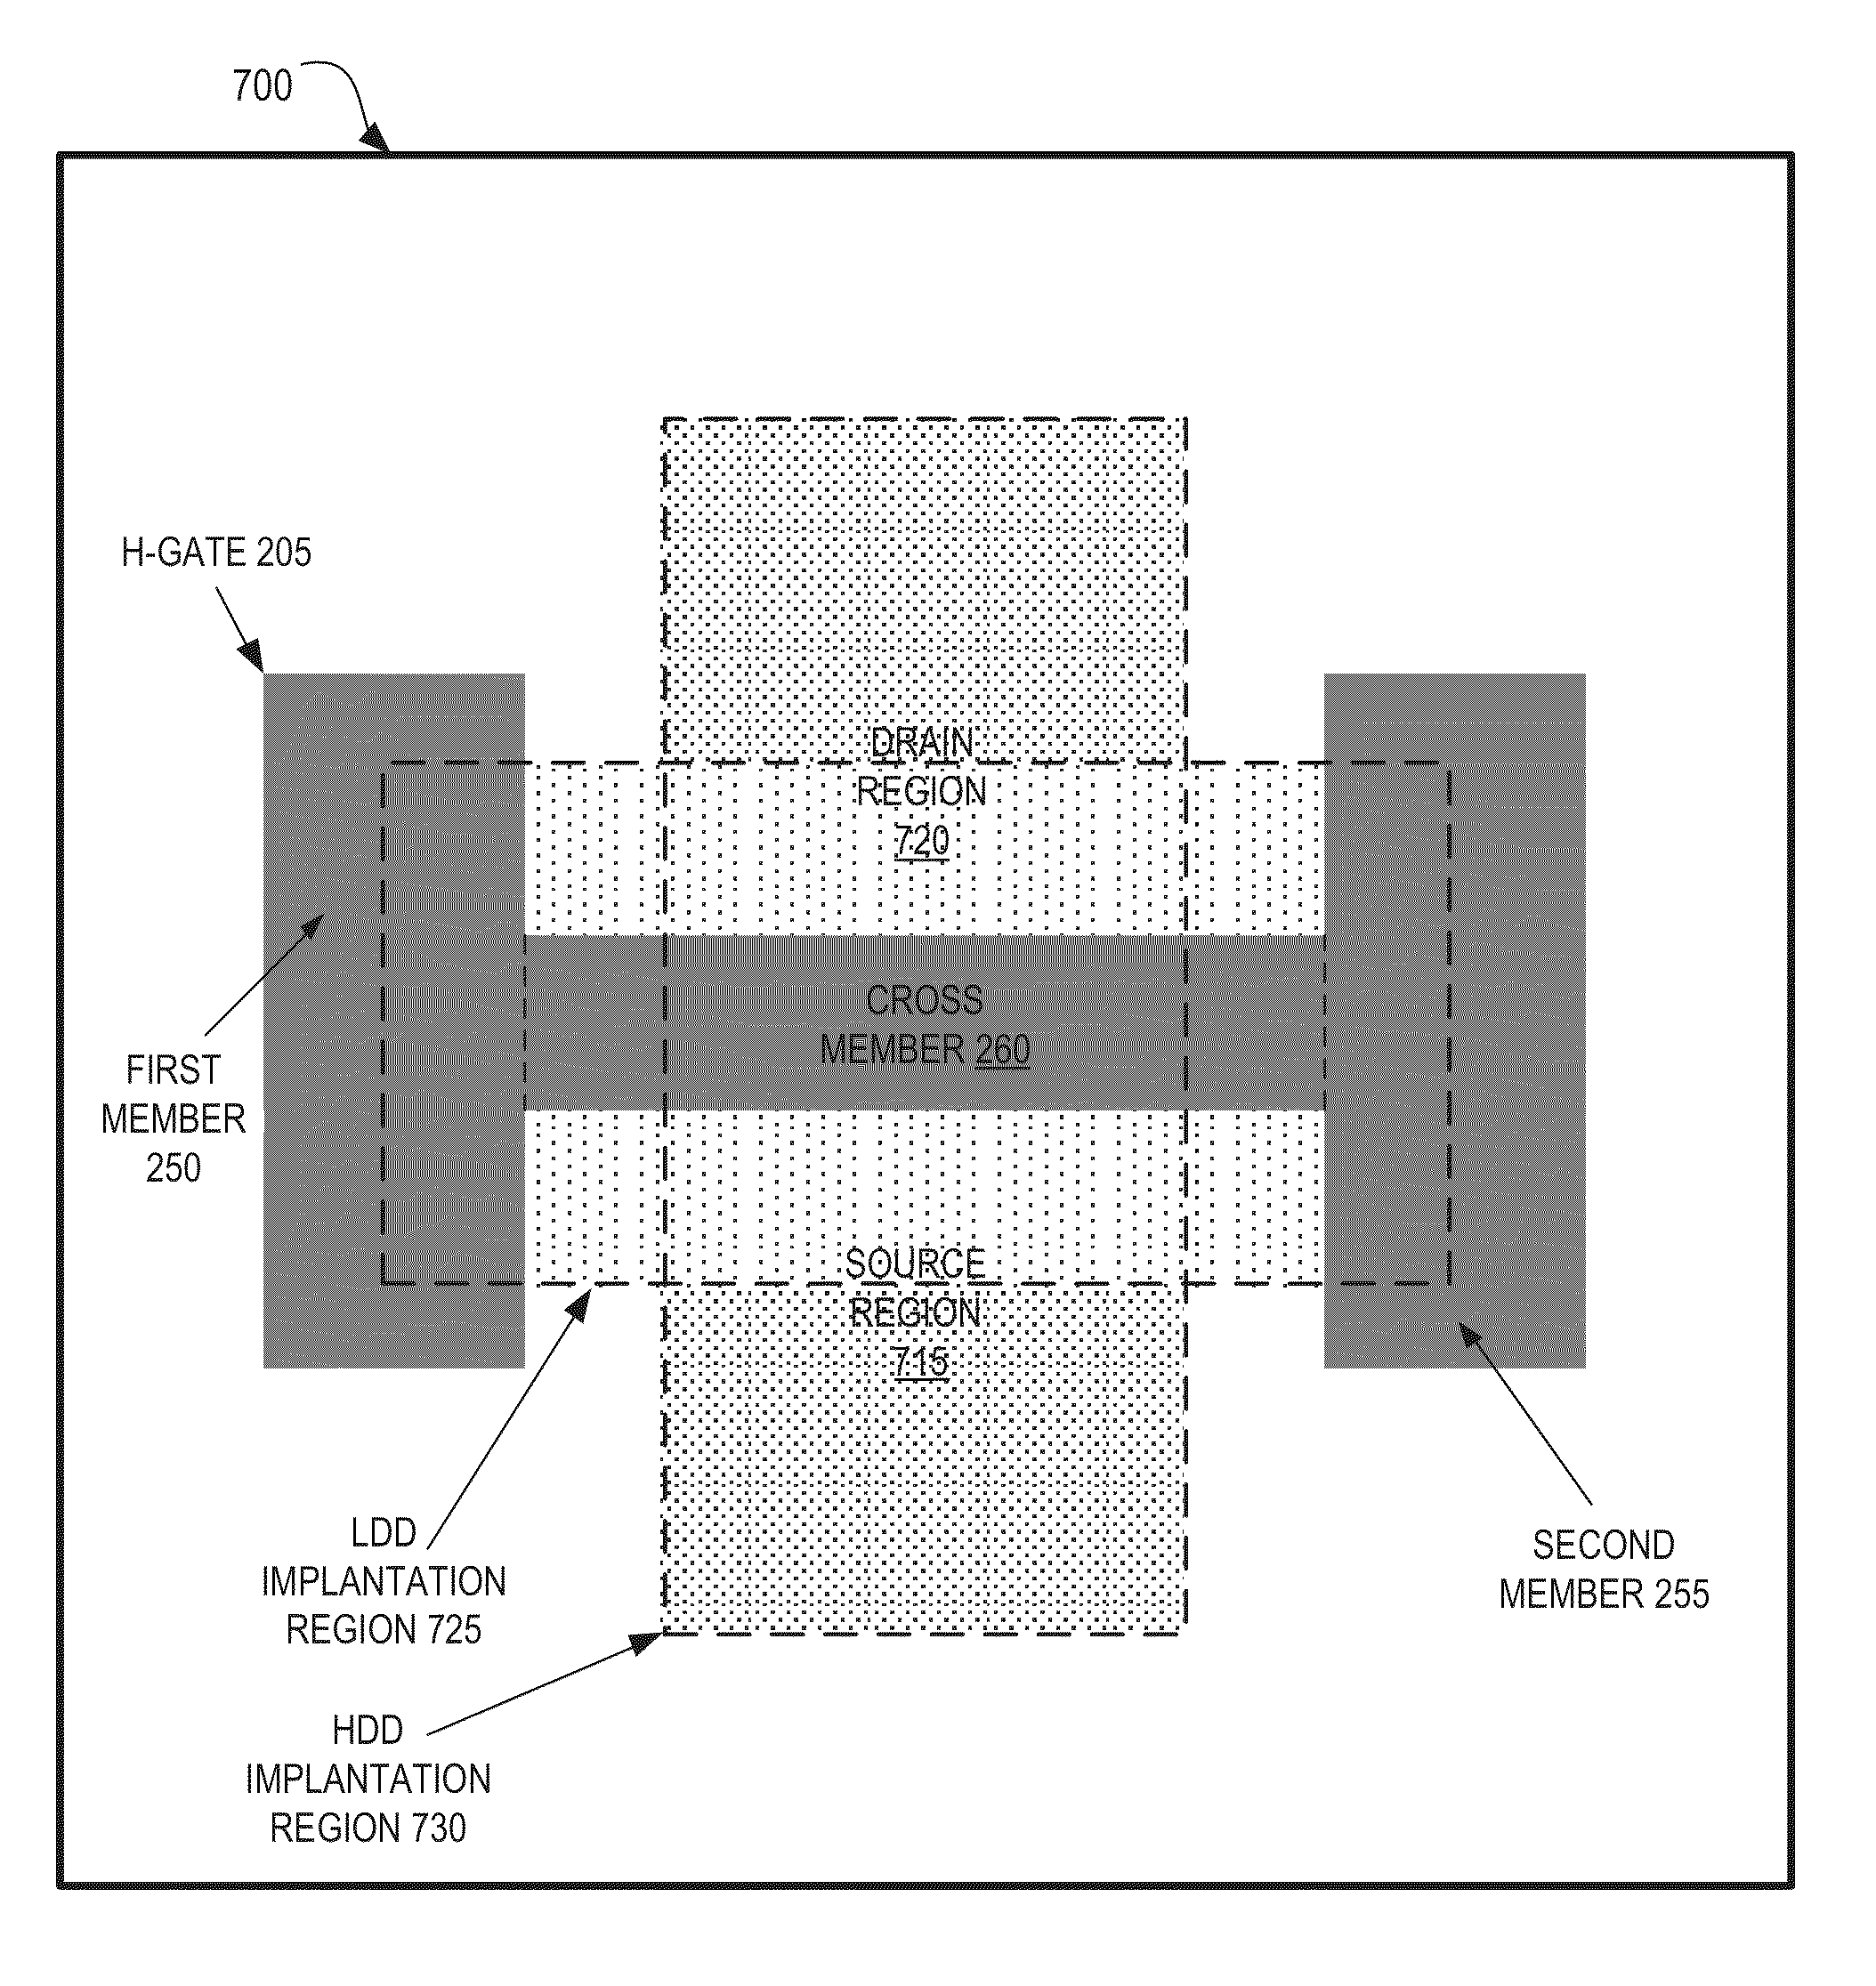 Transistor with self-aligned channel width